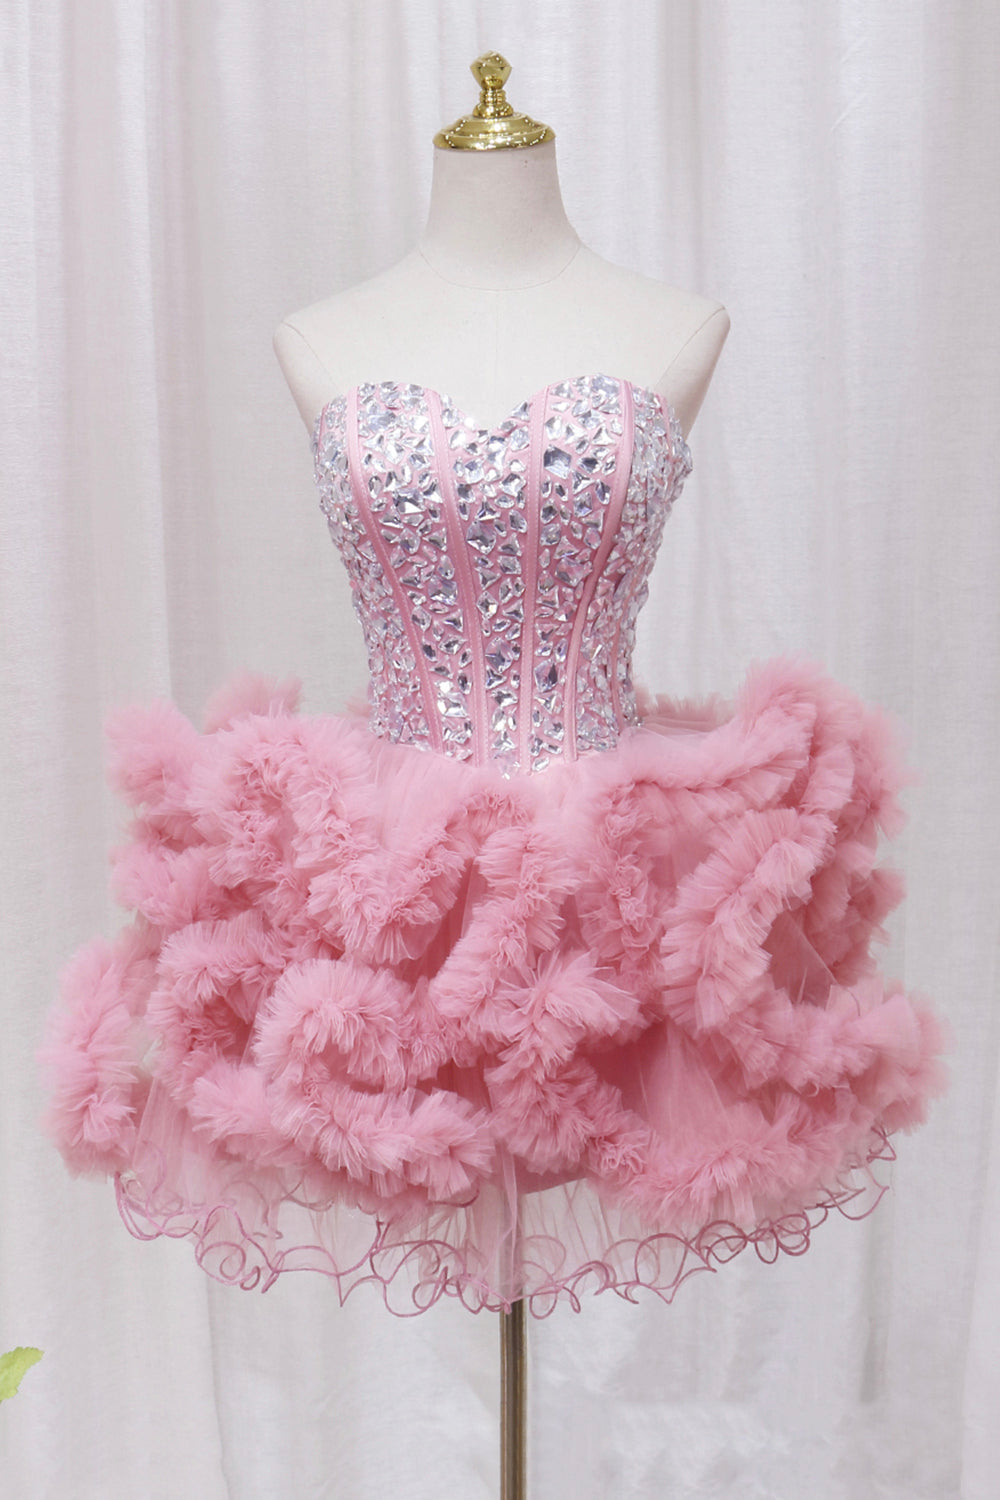 Party Dress Outfit, Pink Tulle Short Homecoming Dress with Rhinestones, Cute Party Dress